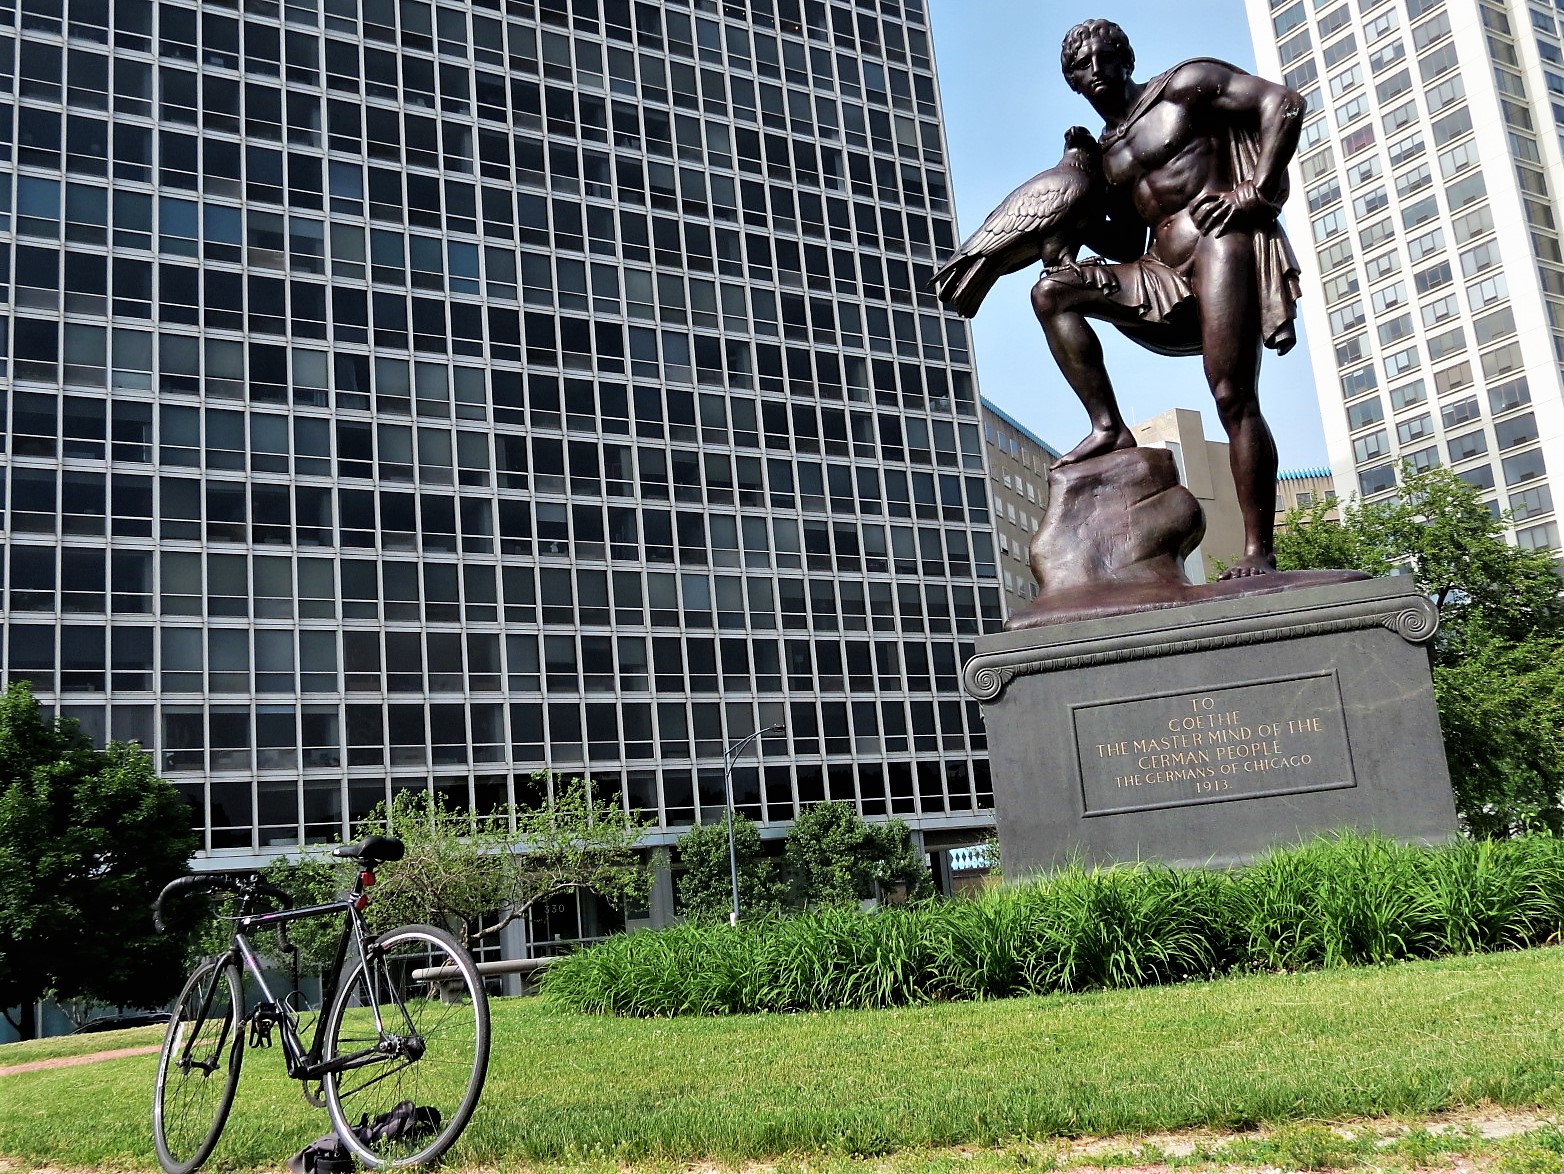 A tour bike standing in front of a bronze sculpture of a figure given the stature of a Greek god holding a bird in one hand and a foot propped on a rock with the glass facade of a condo building behind.